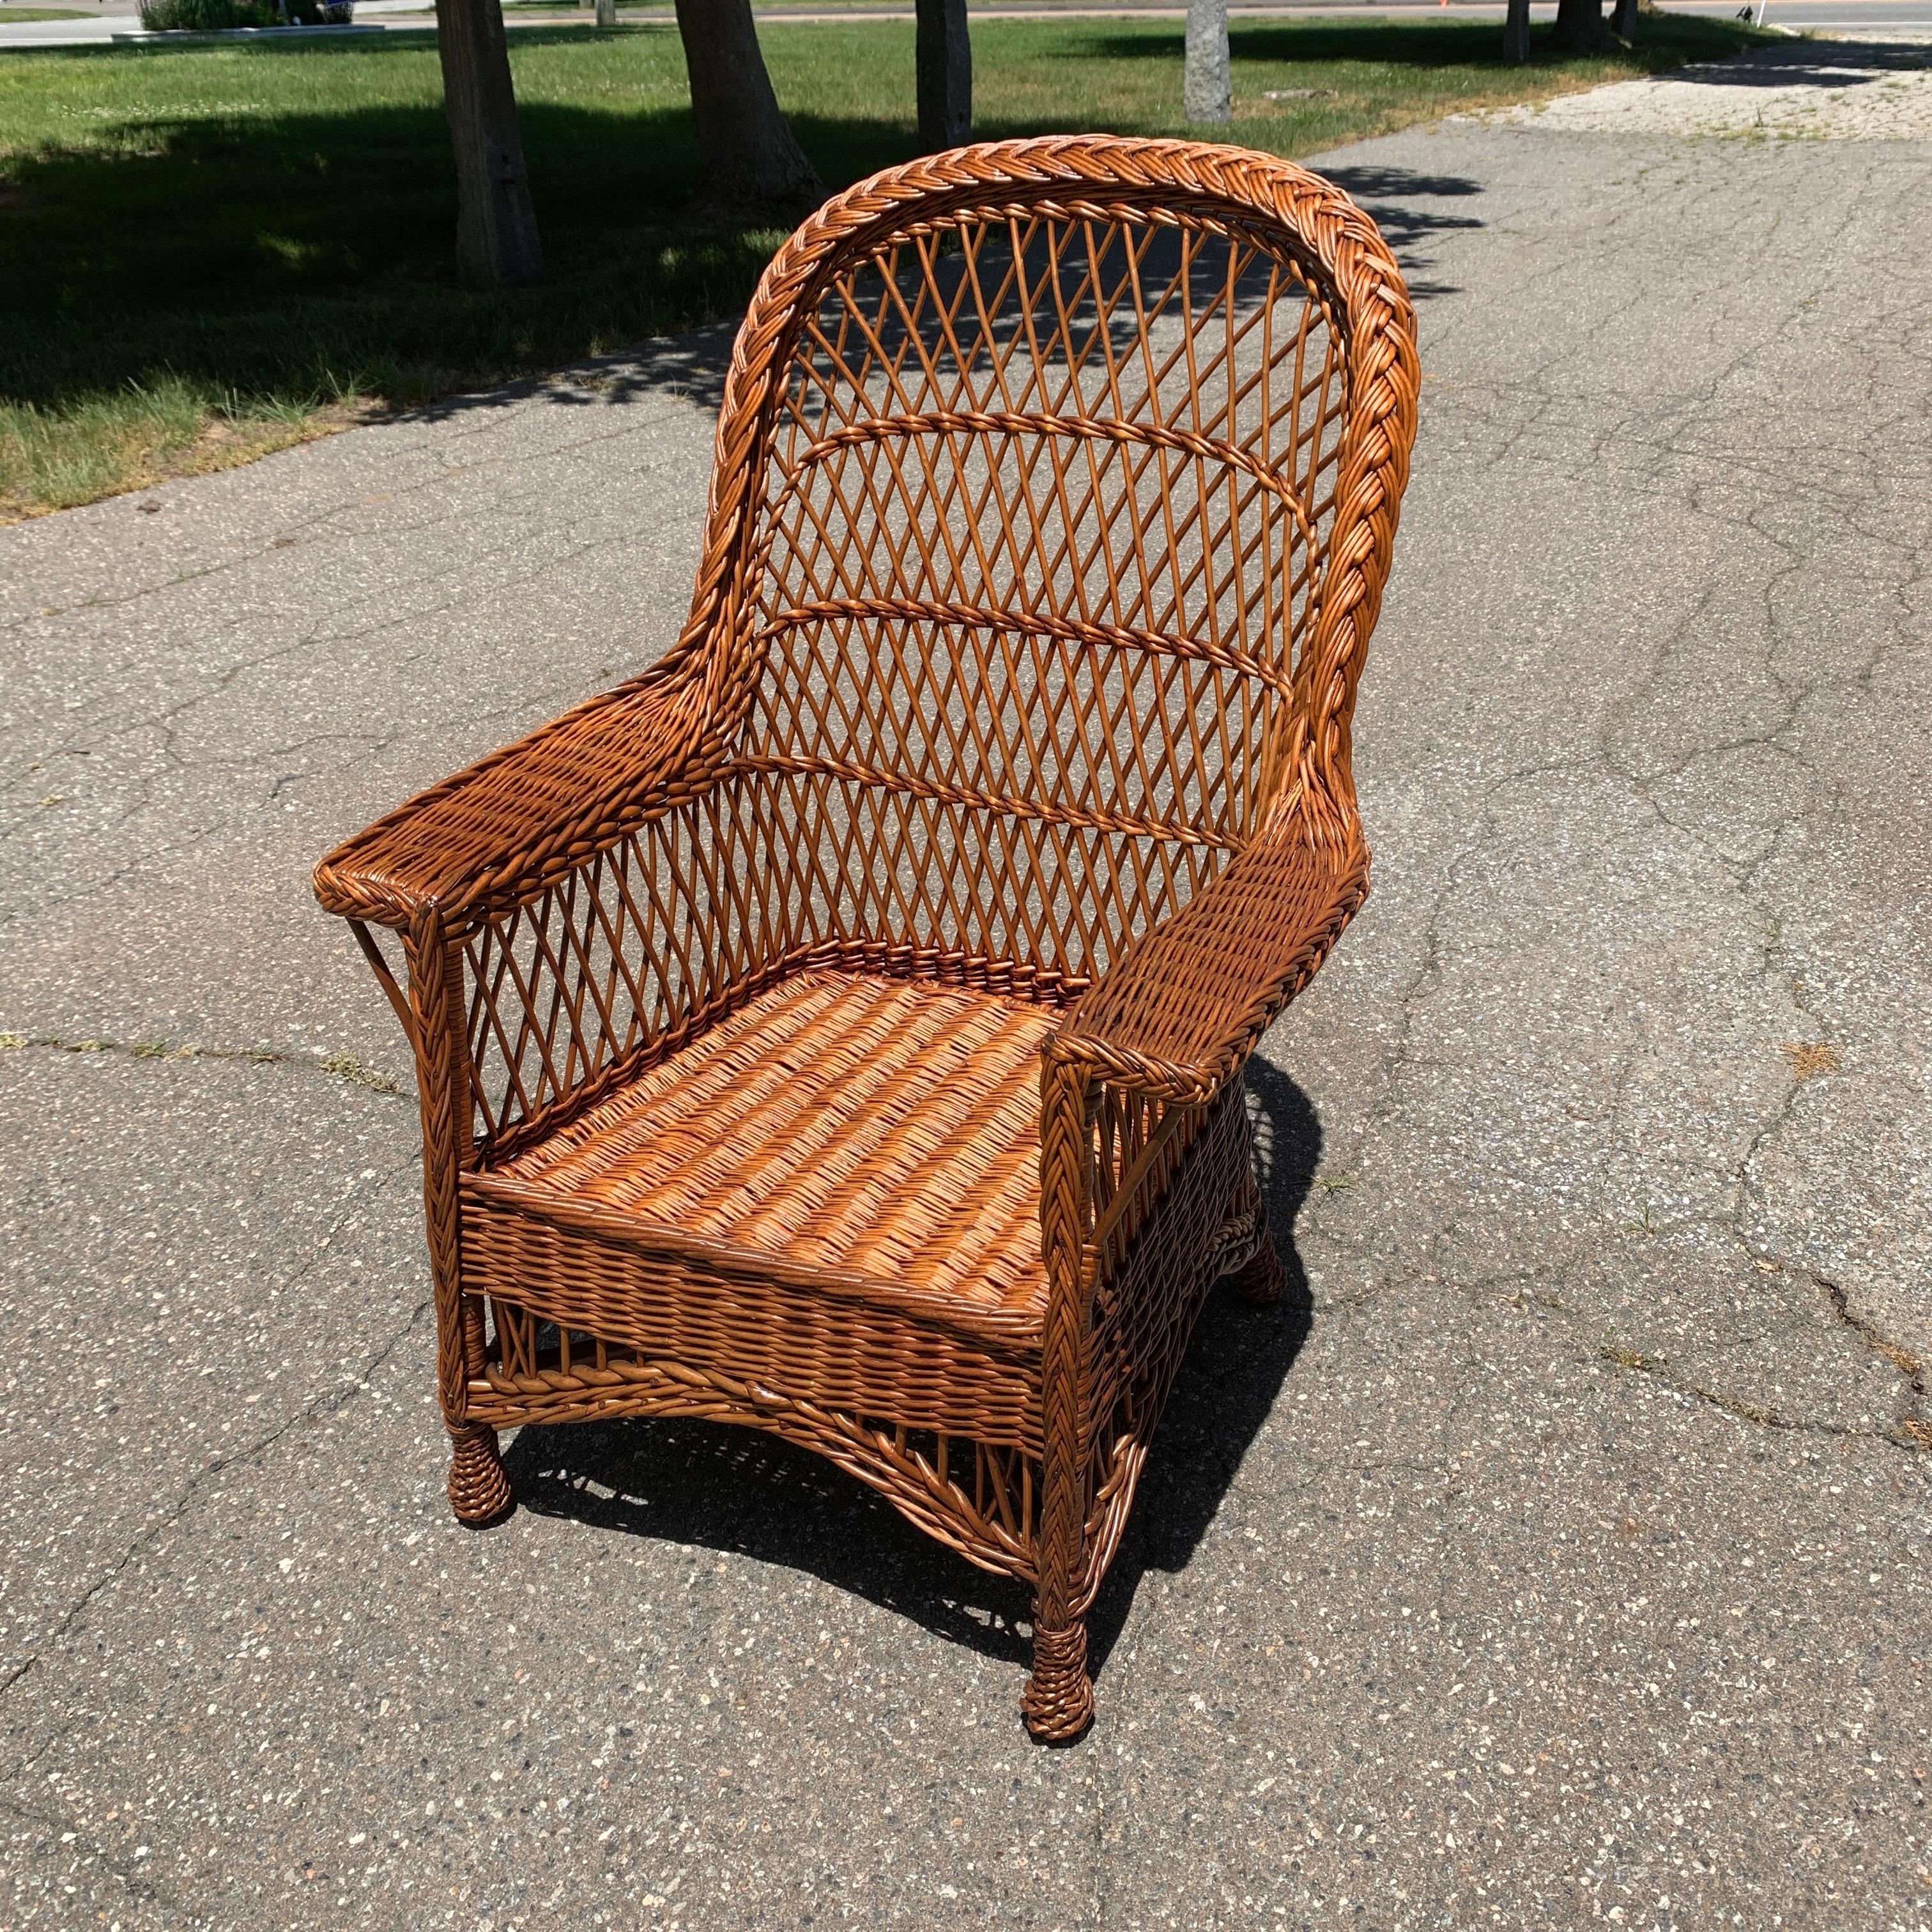 Antique Willow Wicker chair in a natural stain finish. Chair measures 43” tall, 32” wide, 29” deep and seat height is 15”.